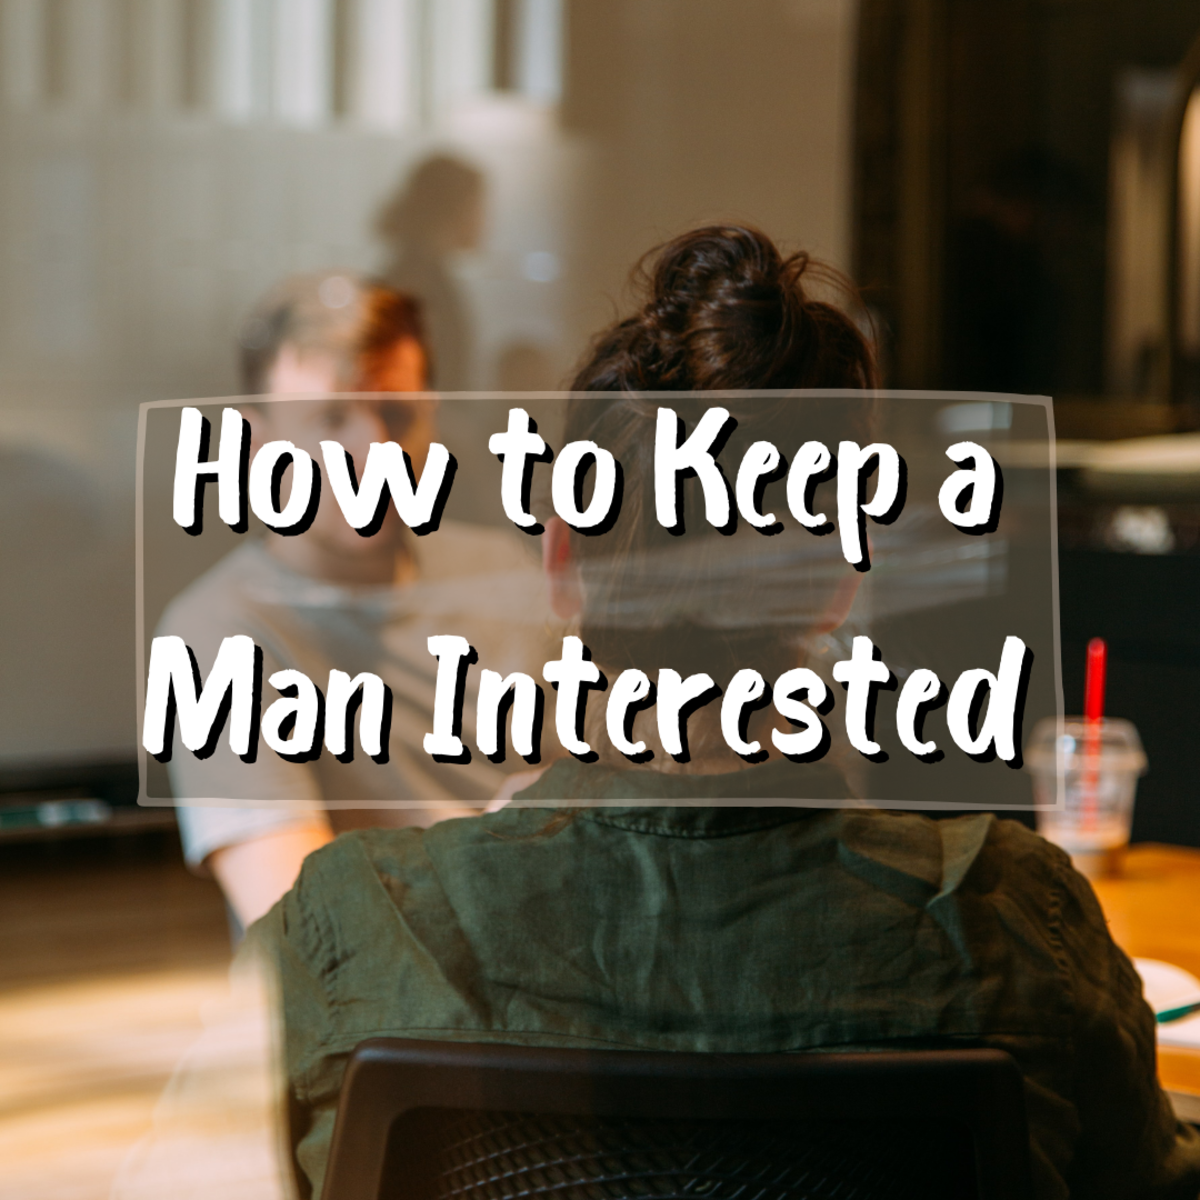 6 Ways to Keep a Man Interested